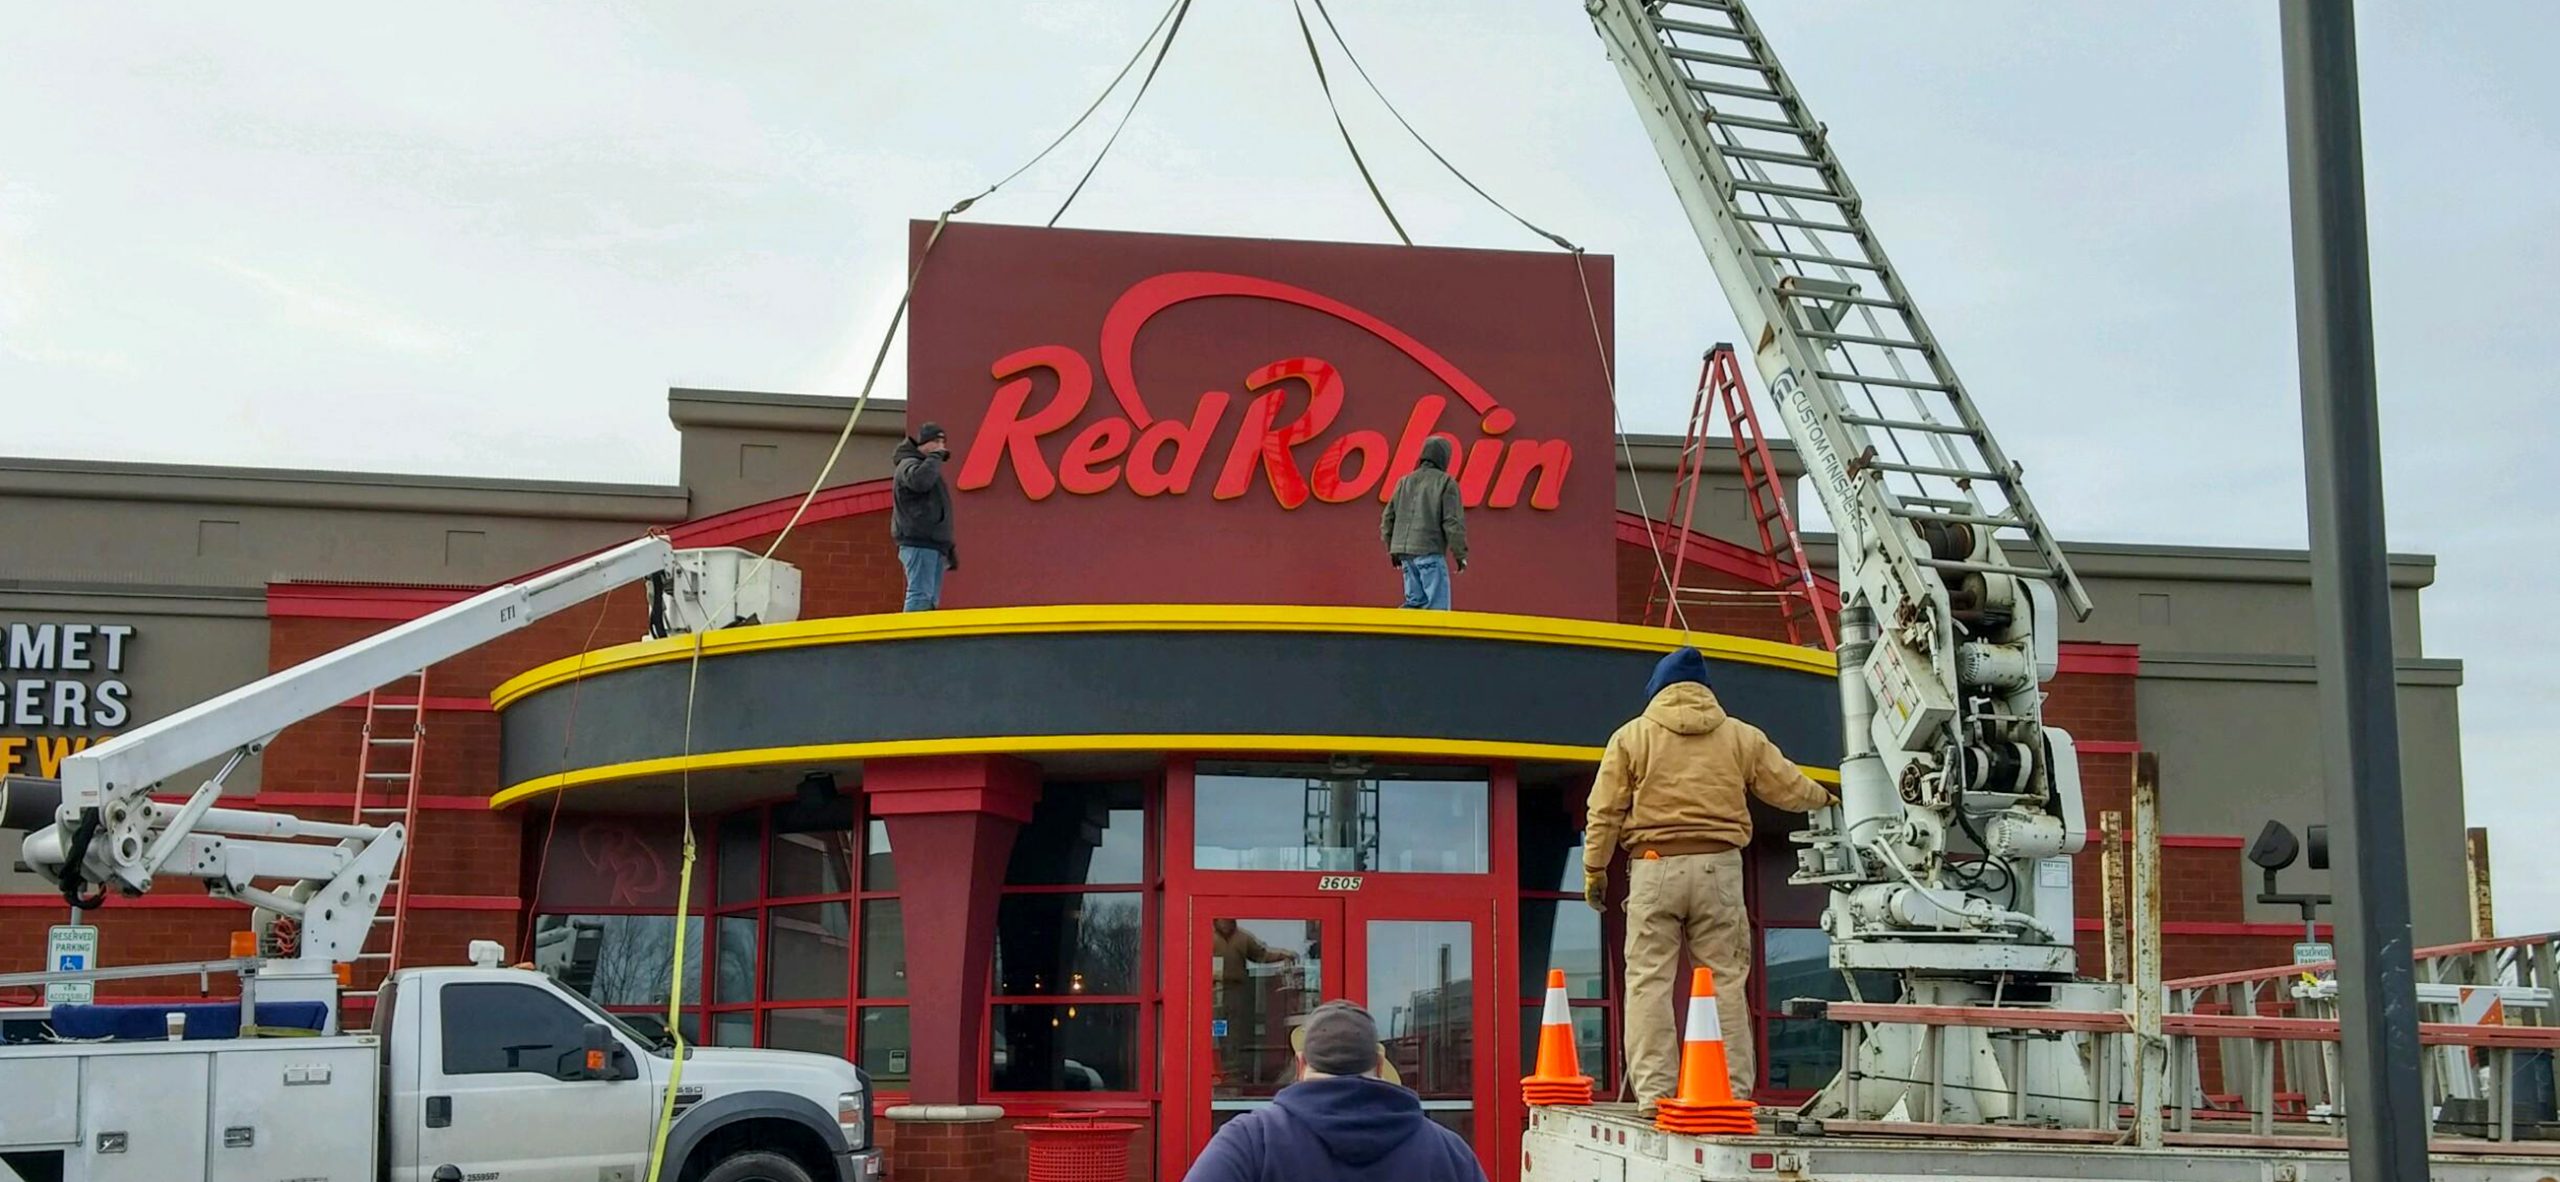 Workers placing a sign at a restaurant entrance.